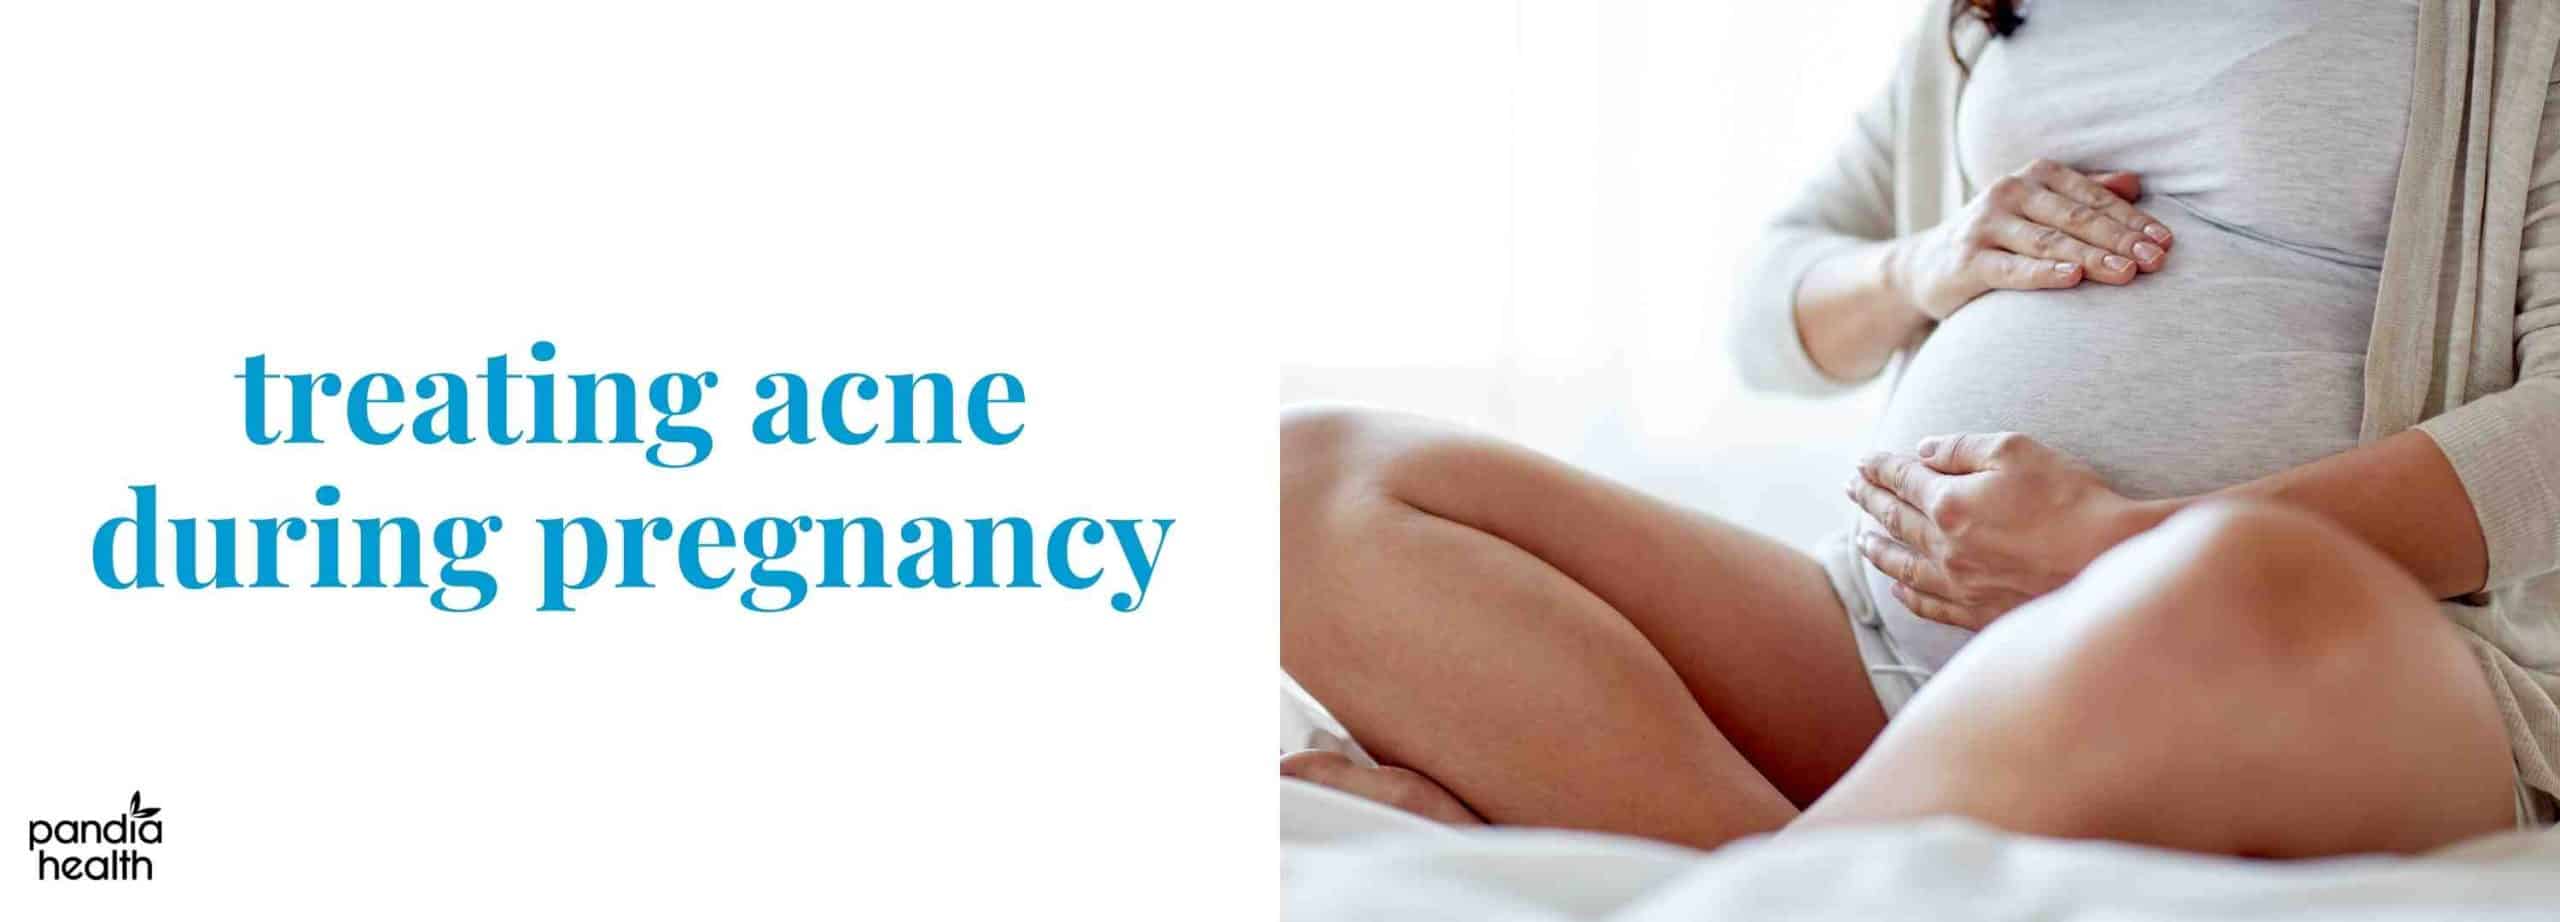 treating acne during pregnancy